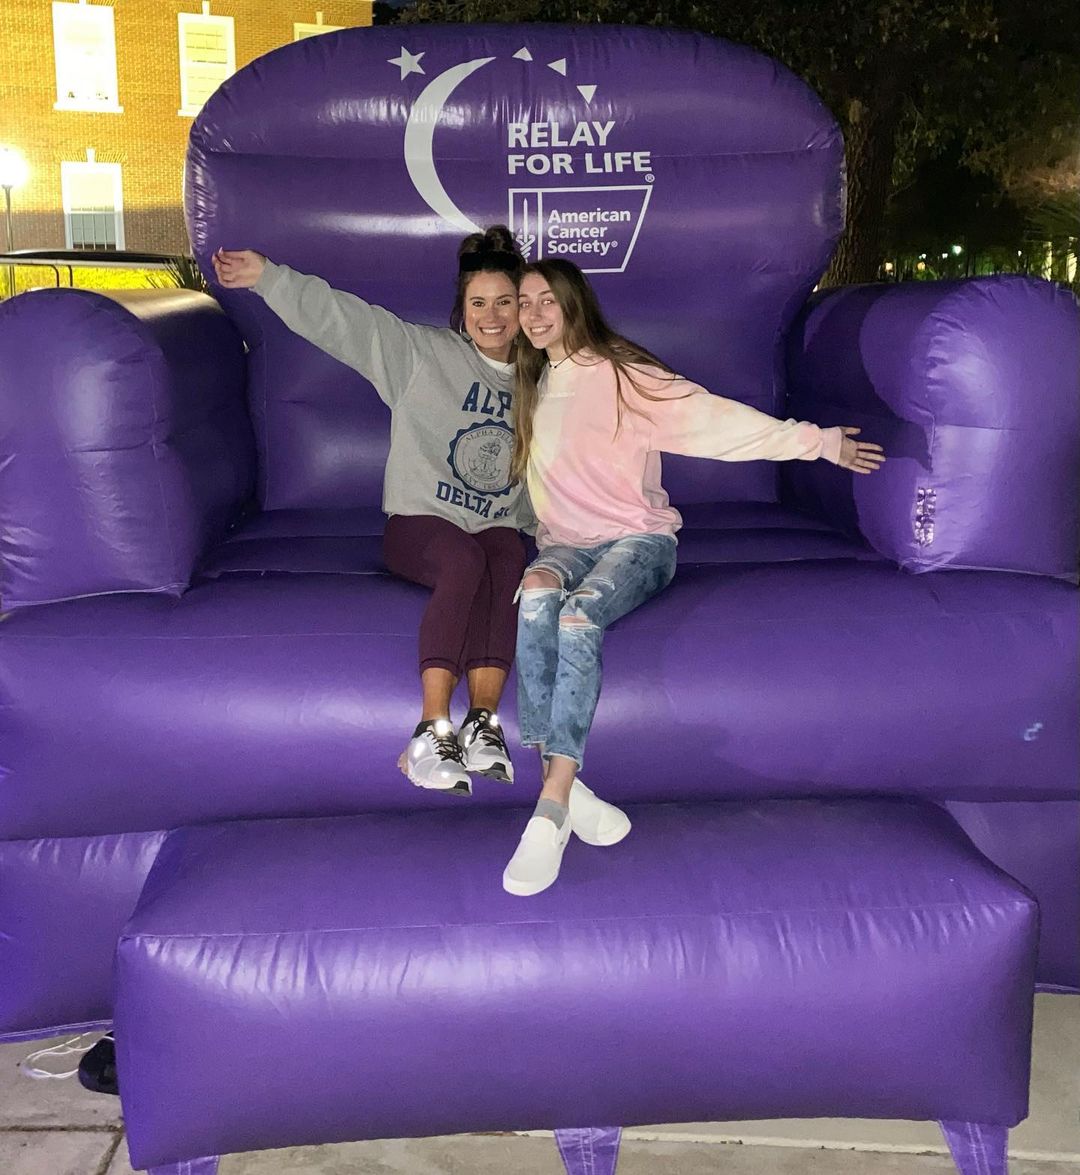 “I Relay to find a cure. 💜🎗” - Emily Thanks for being part of the Relay For Life community! You’re helping us fund breakthrough research, 24/7 support for people with cancer and their loved ones, and access to lifesaving cancer screenings.​ #WhyIRelay #RelayForLife